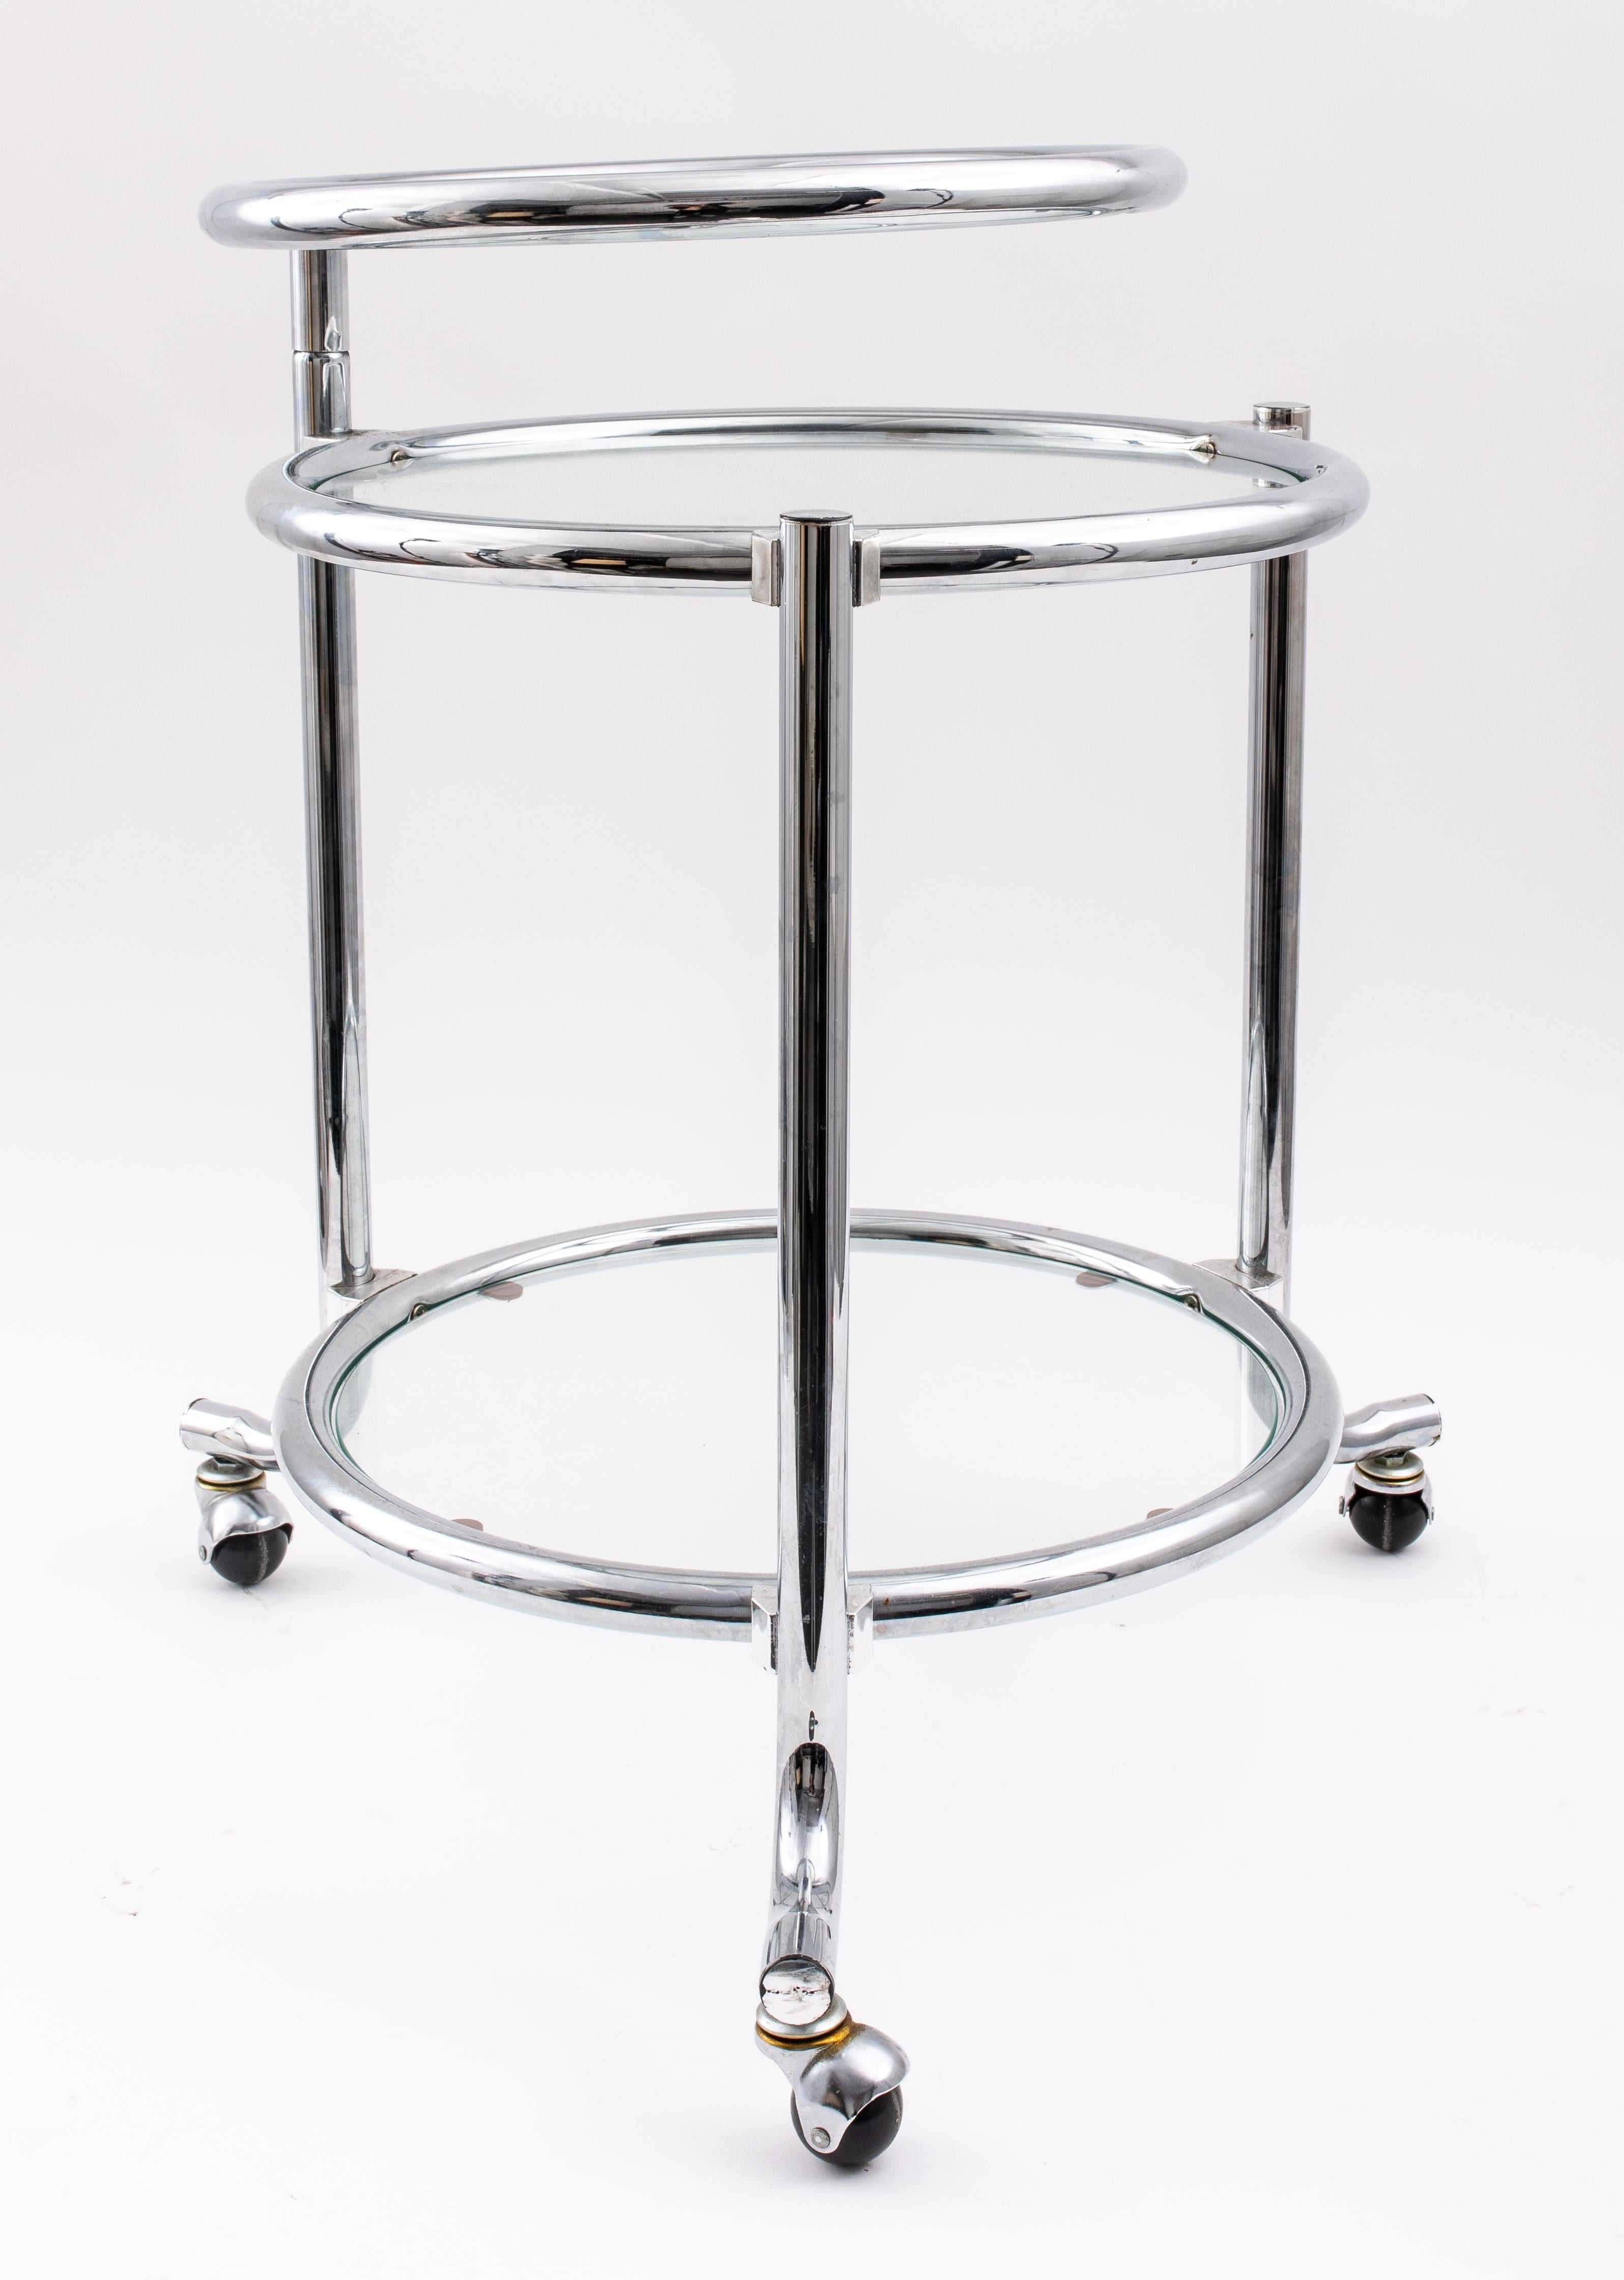 20th Century Modern Chrome & Glass Adjustable 3 Tier Side Table For Sale